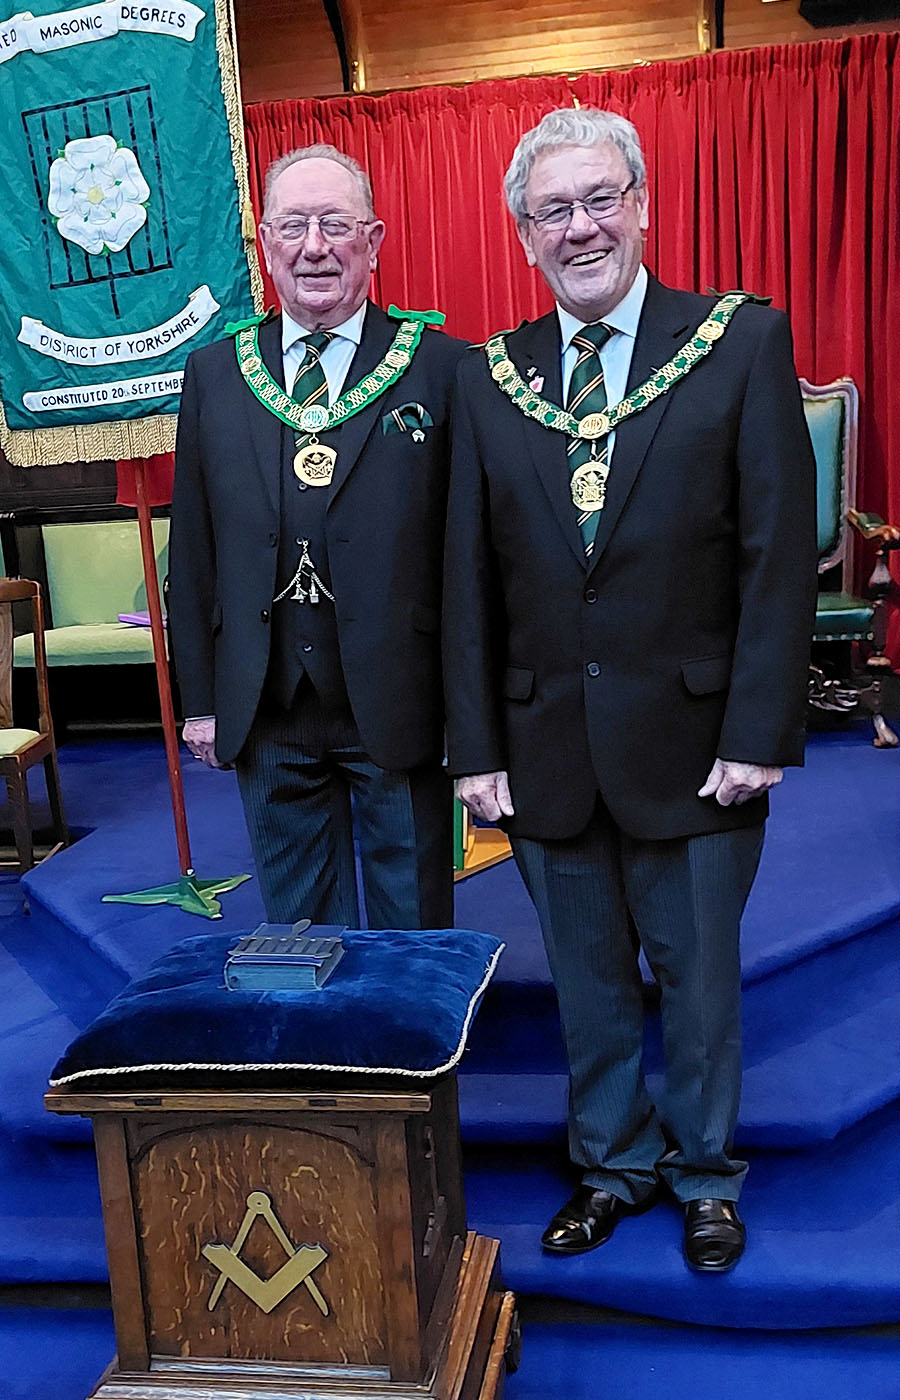 D.G.P. for Yorkshire R.W.Bro. Brian Butterfield with the D.G.P. for Kent R.W.Bro. Brian Ward